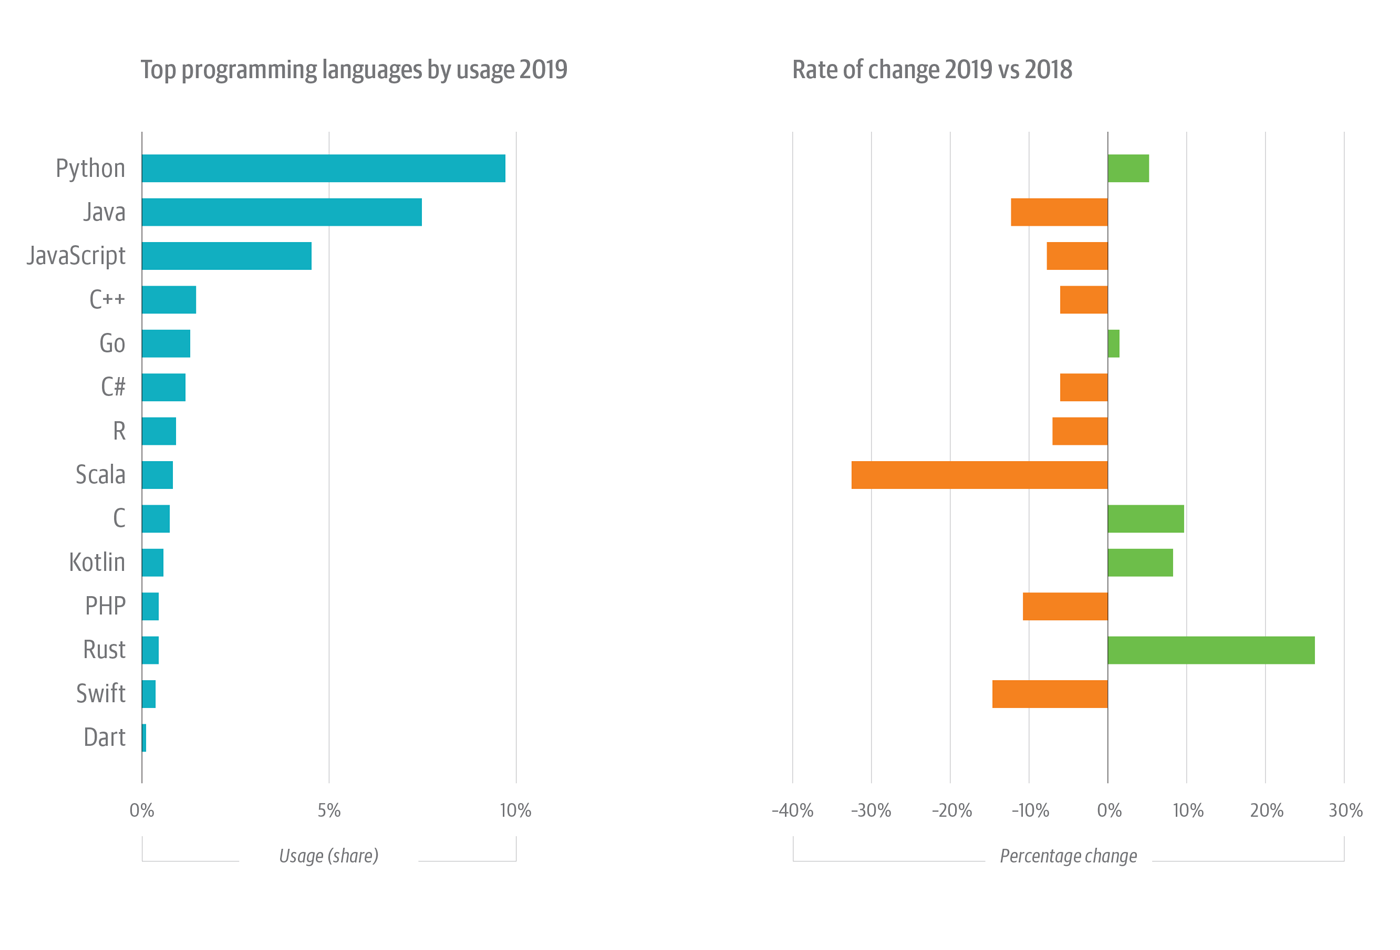 Programming languages on the O’Reilly online learning platform with the most usage in 2019 (left) and the rate of change for each language (right).